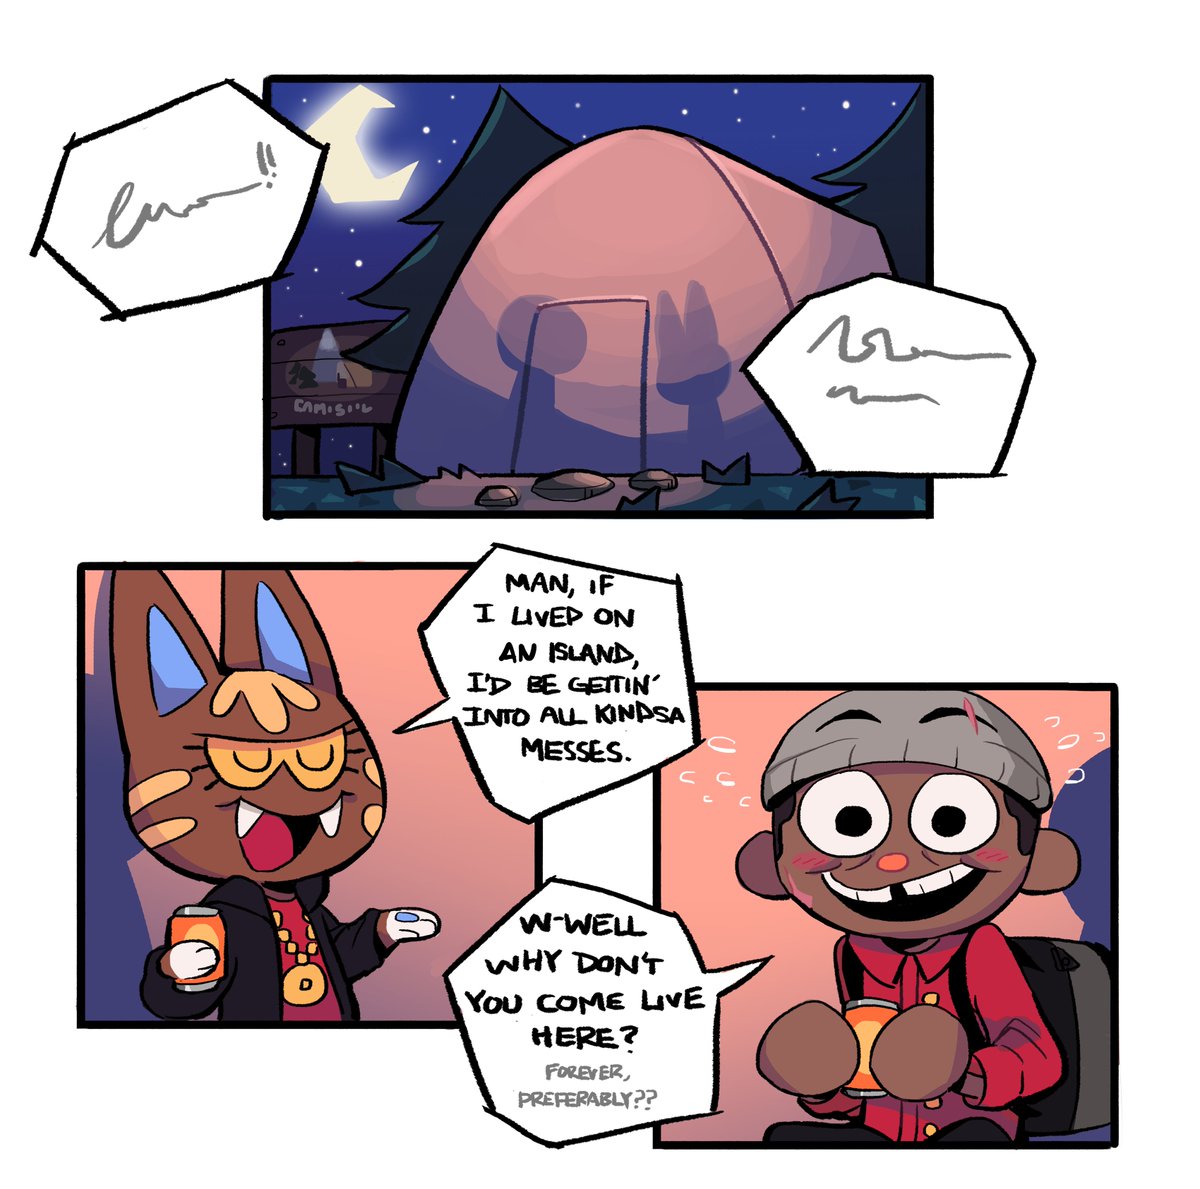 reposting old animal crossing comic, since it's probably vanished from my media history now